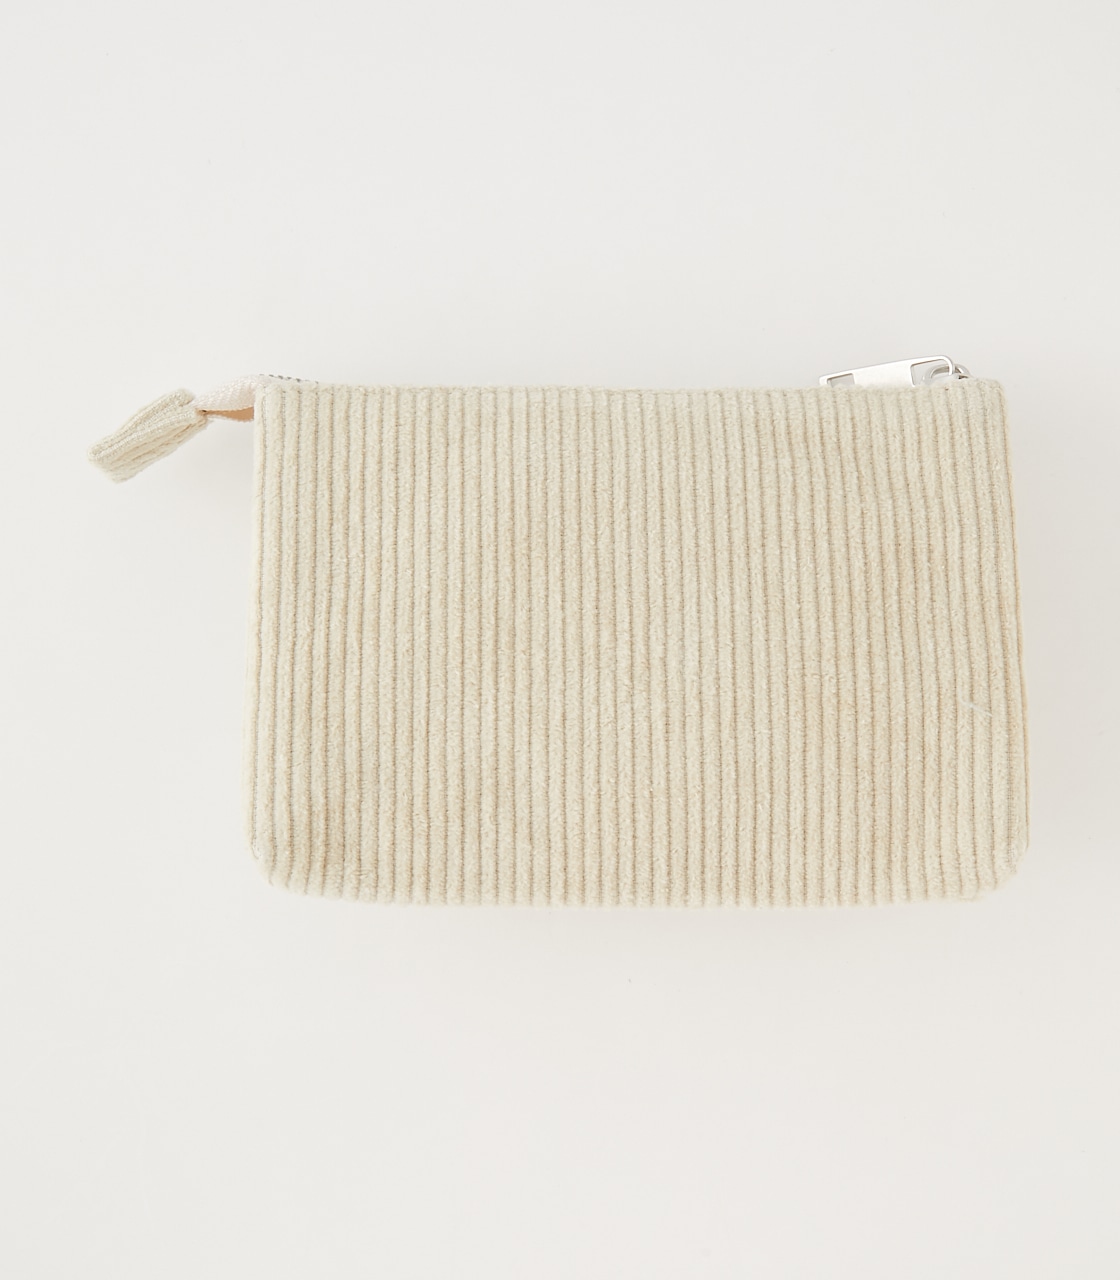 CONCHO CORDUROY POUCH/コンチョコーデュロイポーチ 詳細画像 IVOY 2